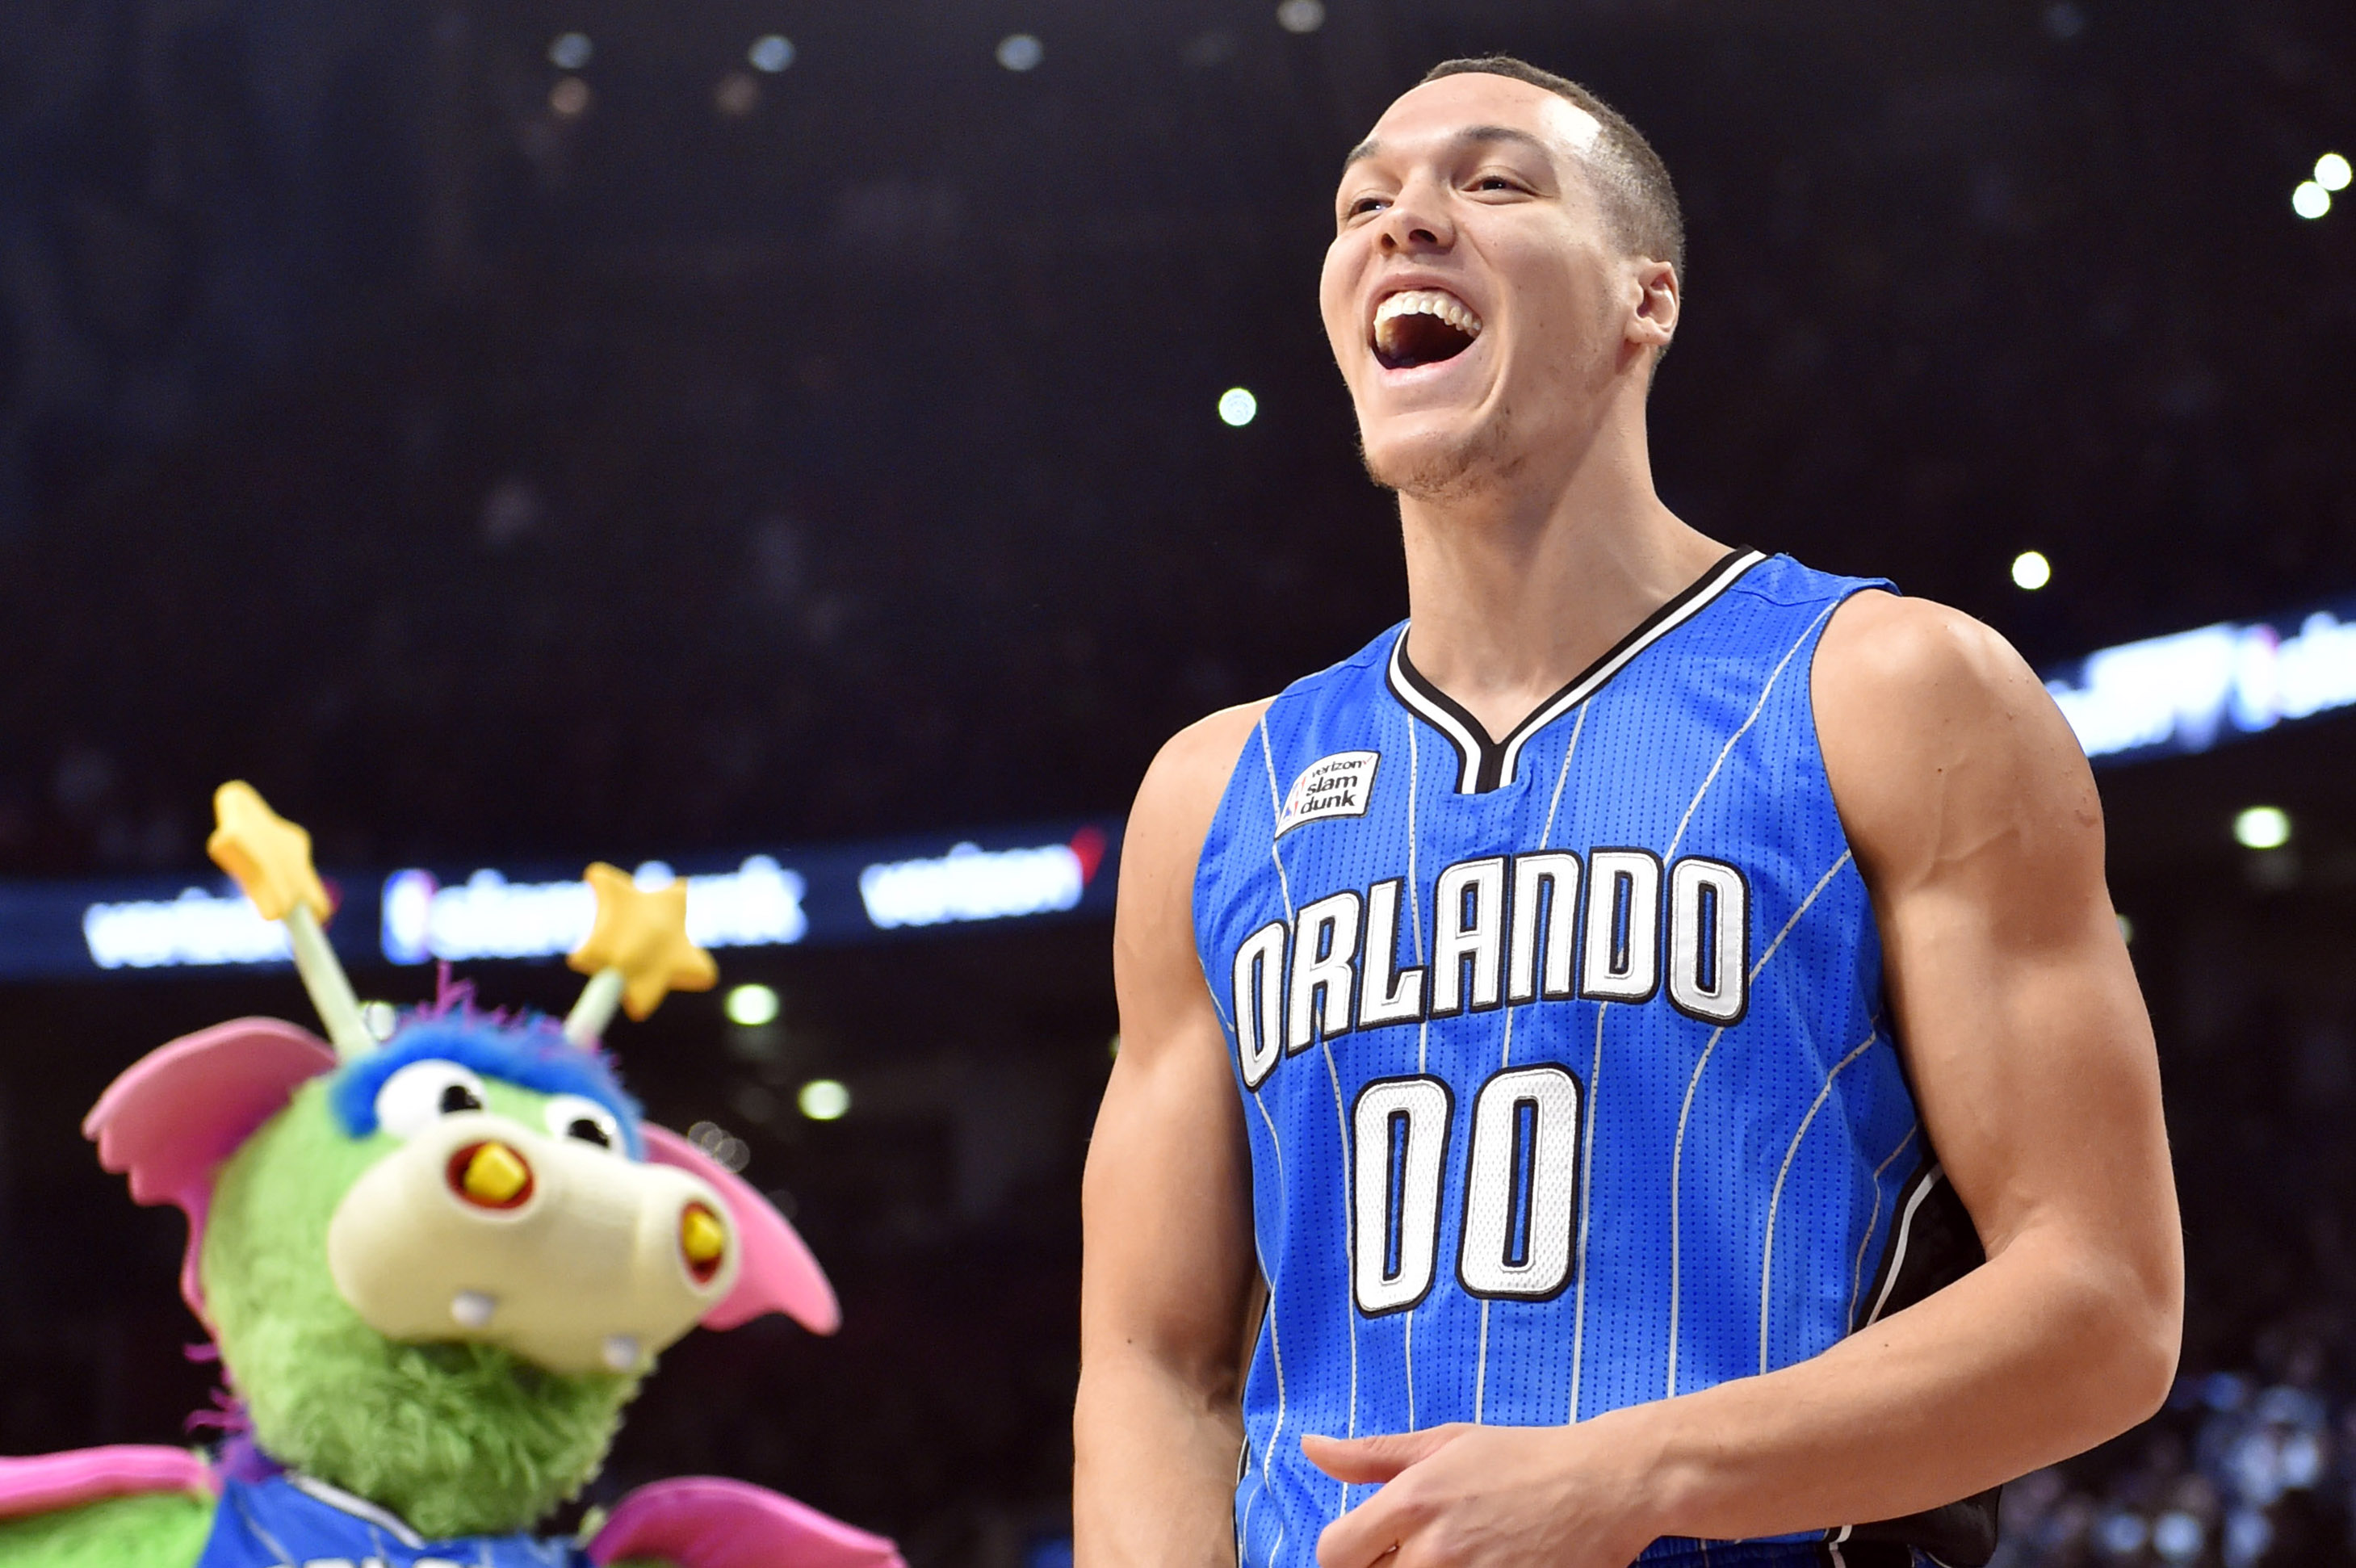 Aaron Gordon replicated his Dunk Contest performance in street clothes